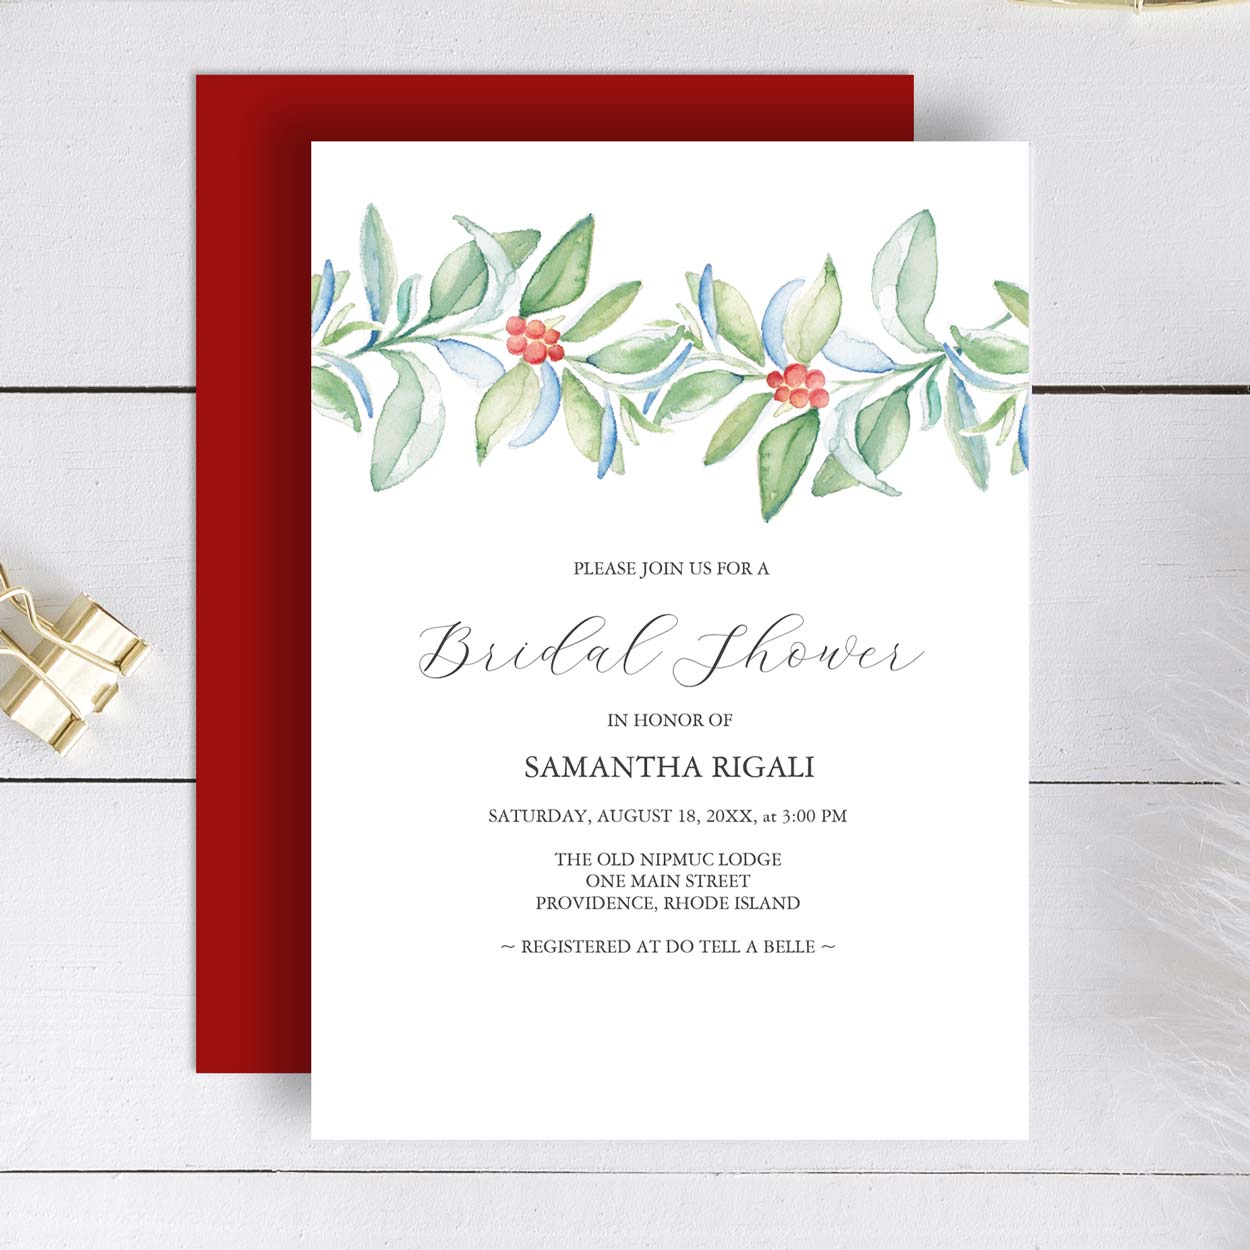 Winter bridal shower invitations features a top boarder of Christmas greenery and red berries watercolor art by Victoria Grigaliunas. Click to shop.